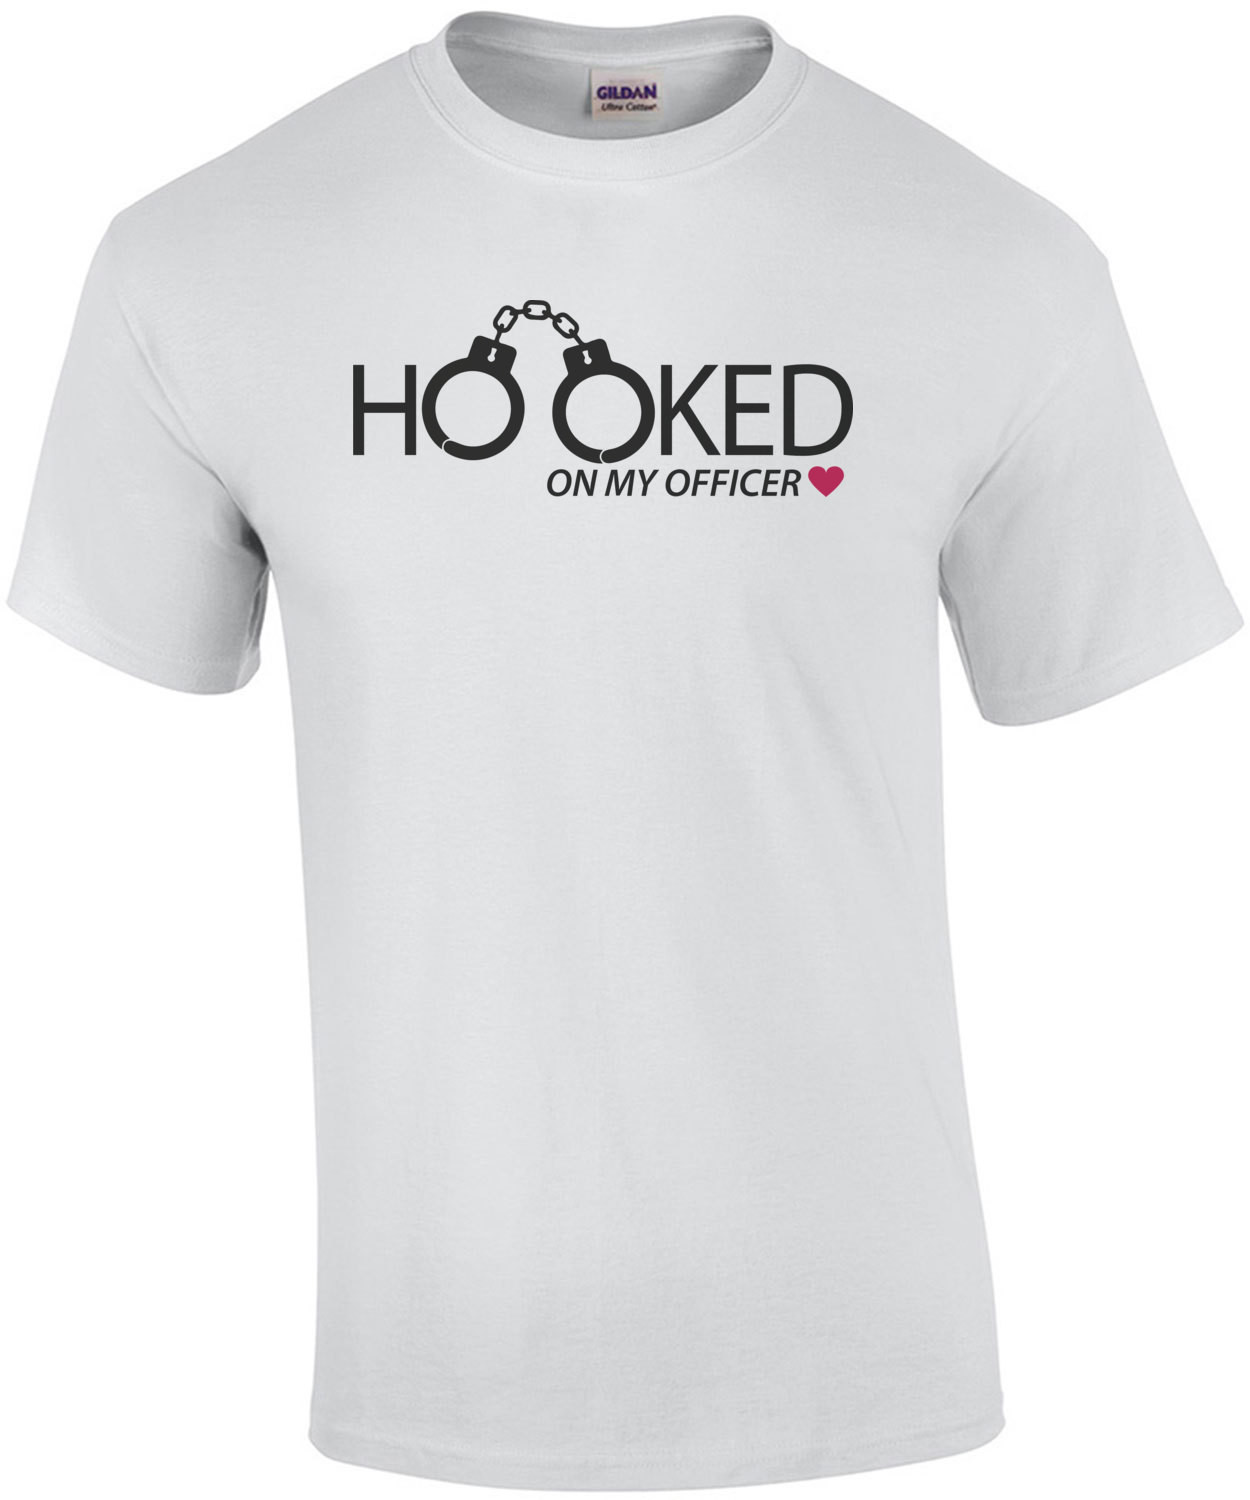 Hooked on my officer - pro cop